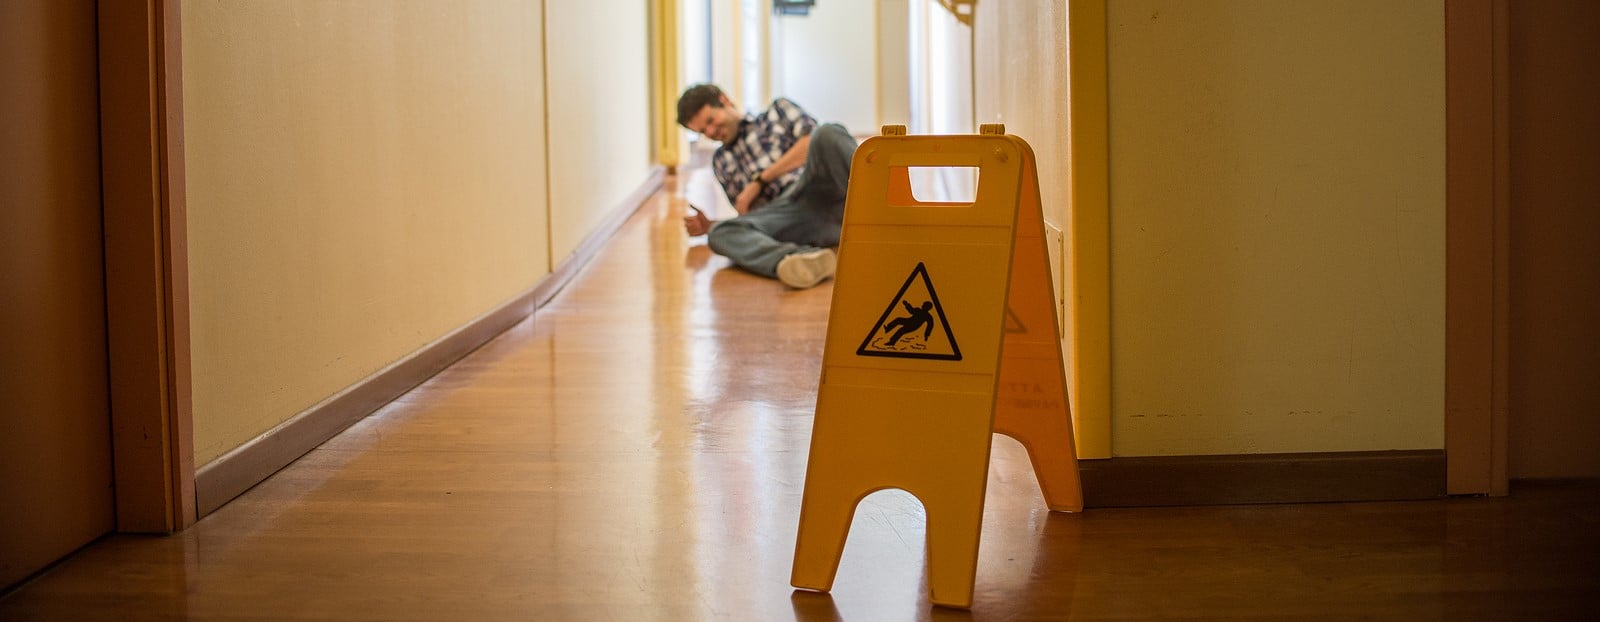 Slip and Fall Accidents and Spinal Injuries: Legal Implications in Georgia